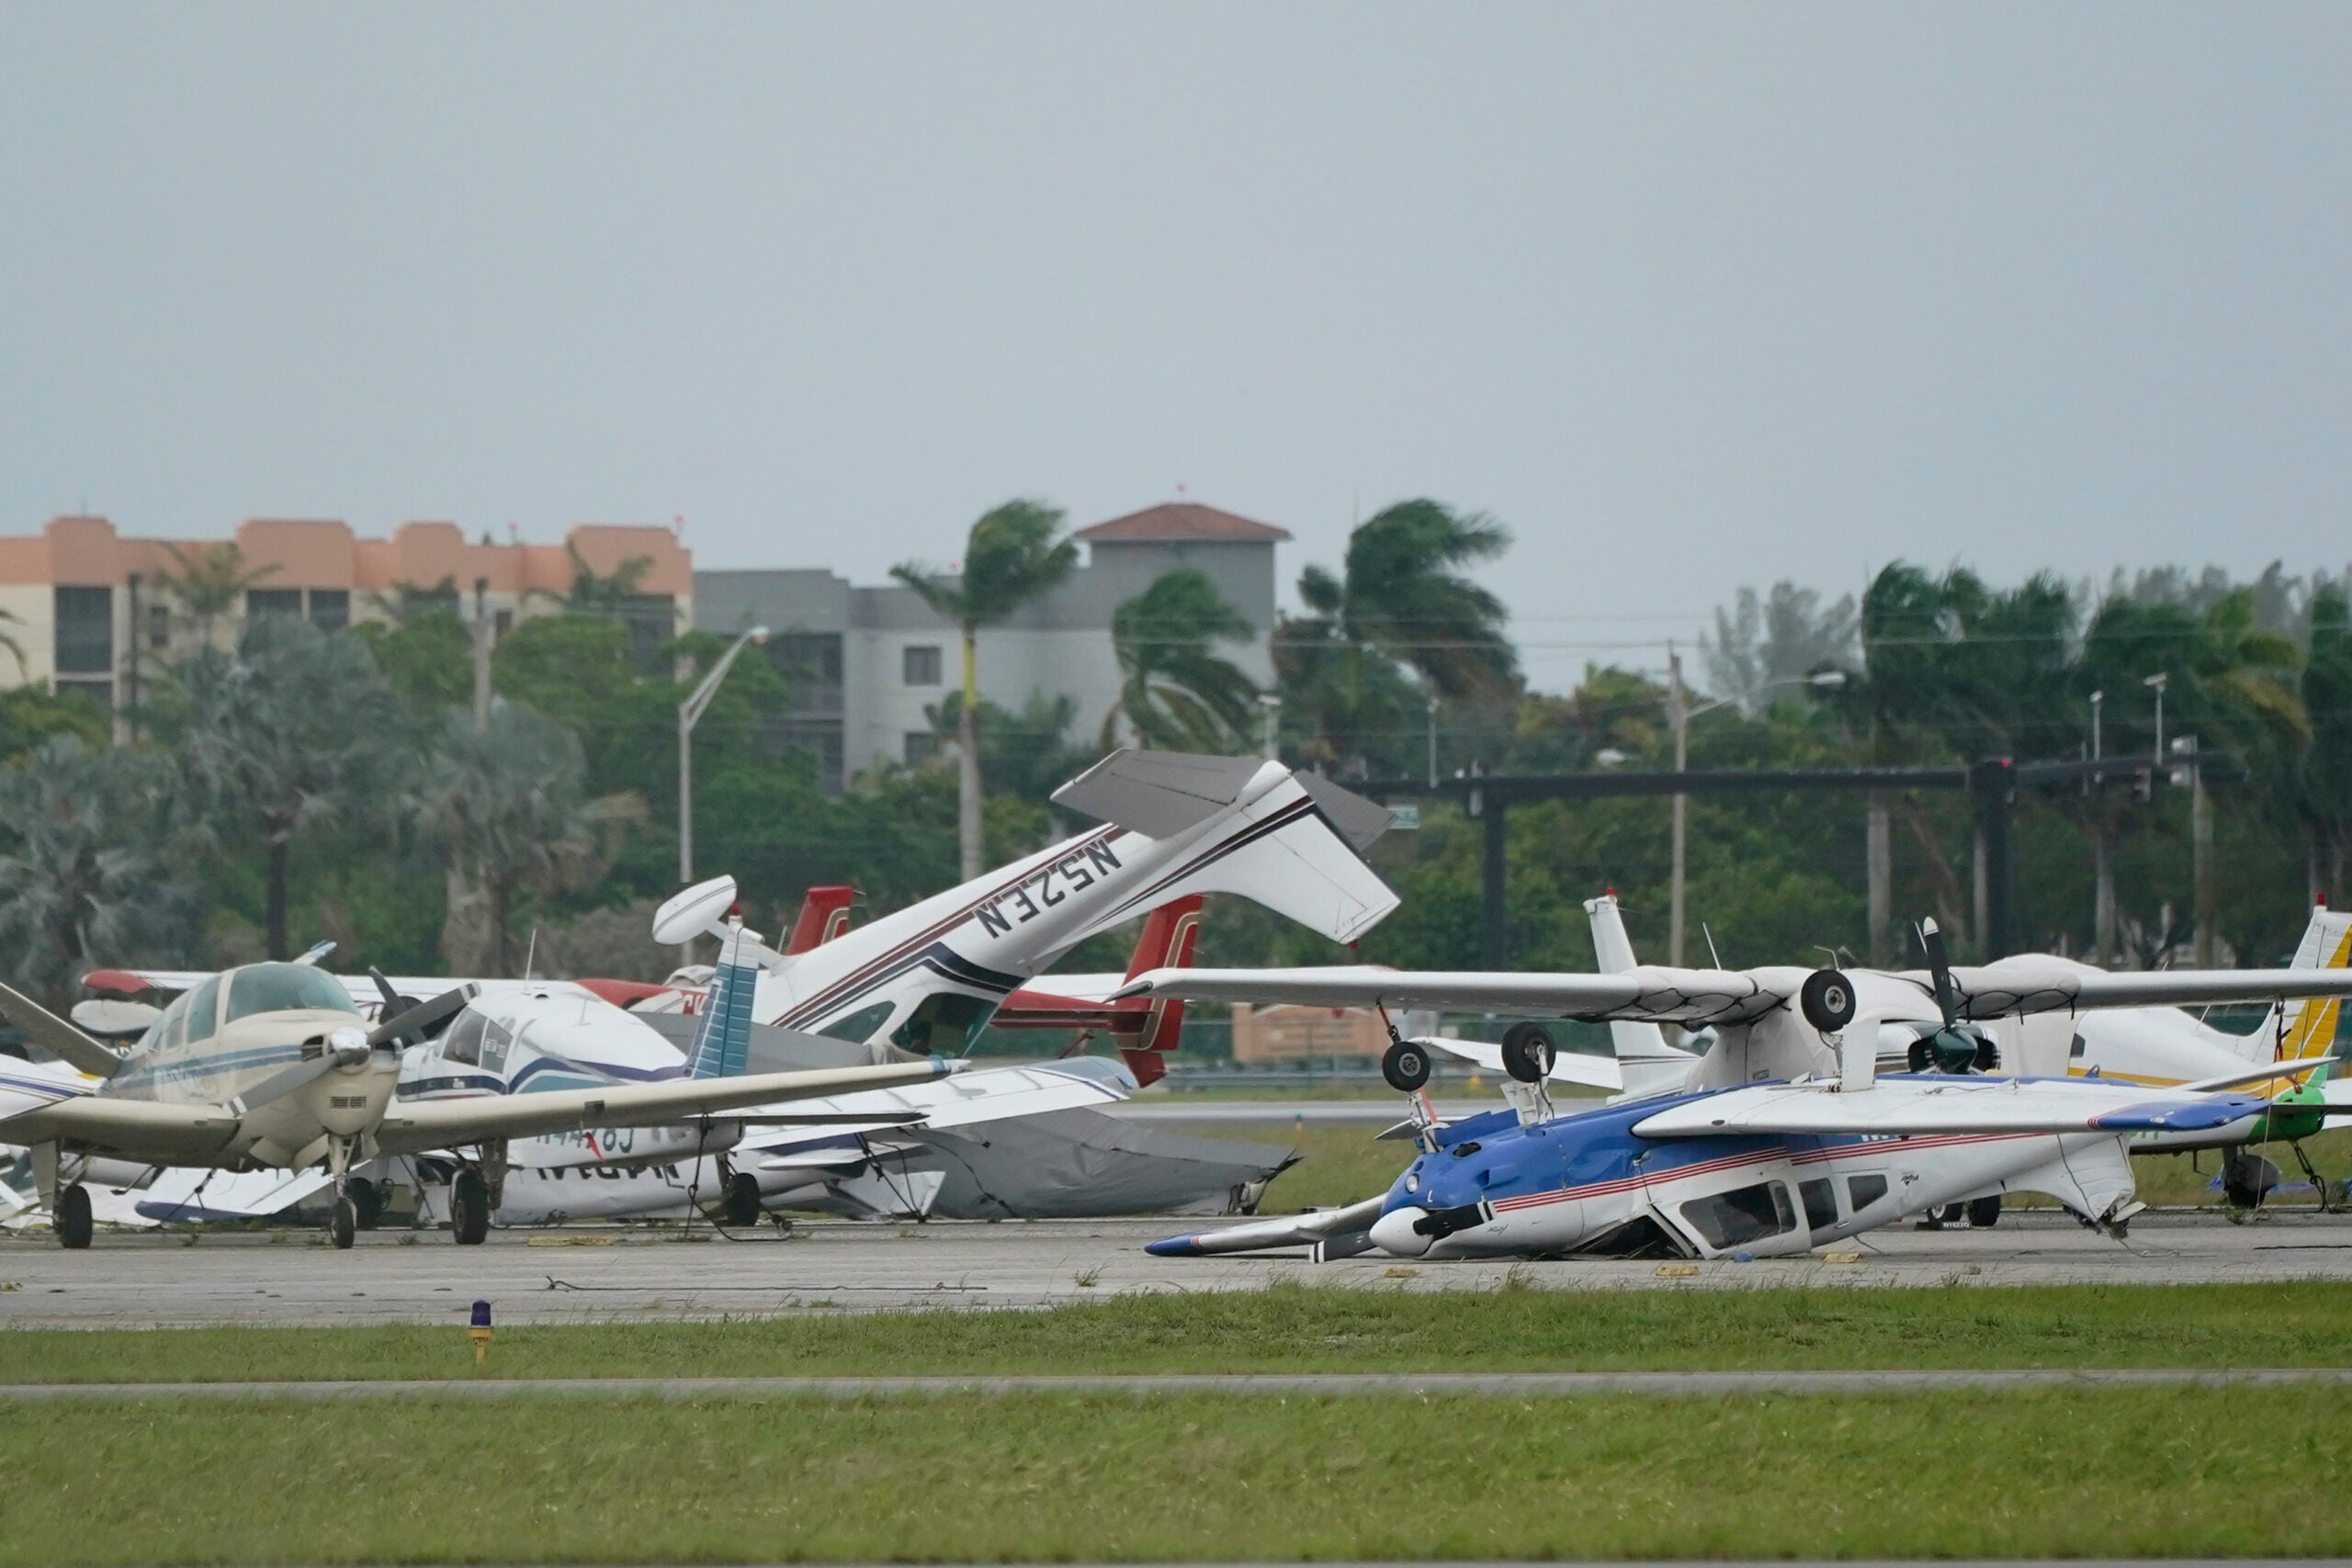 Airplanes overturned in Pembroke Pines, Florida